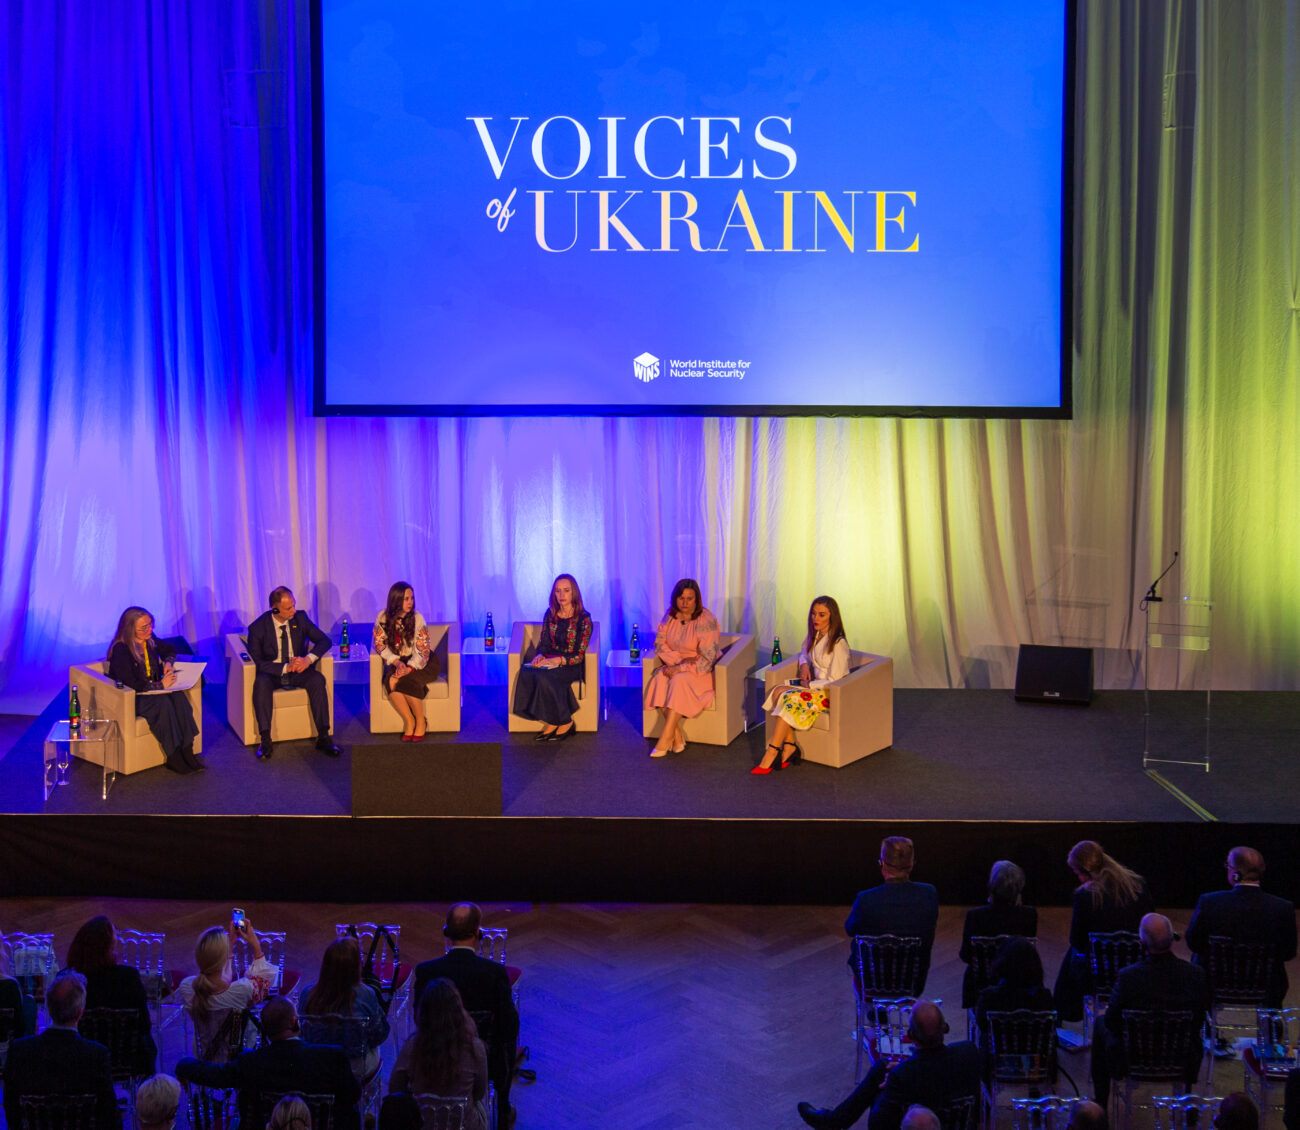 ISTC and Department of Energy (USA) sponsored WINS that launched Voices of Ukraine Book on Impact of War on Nuclear Workers and Facilities